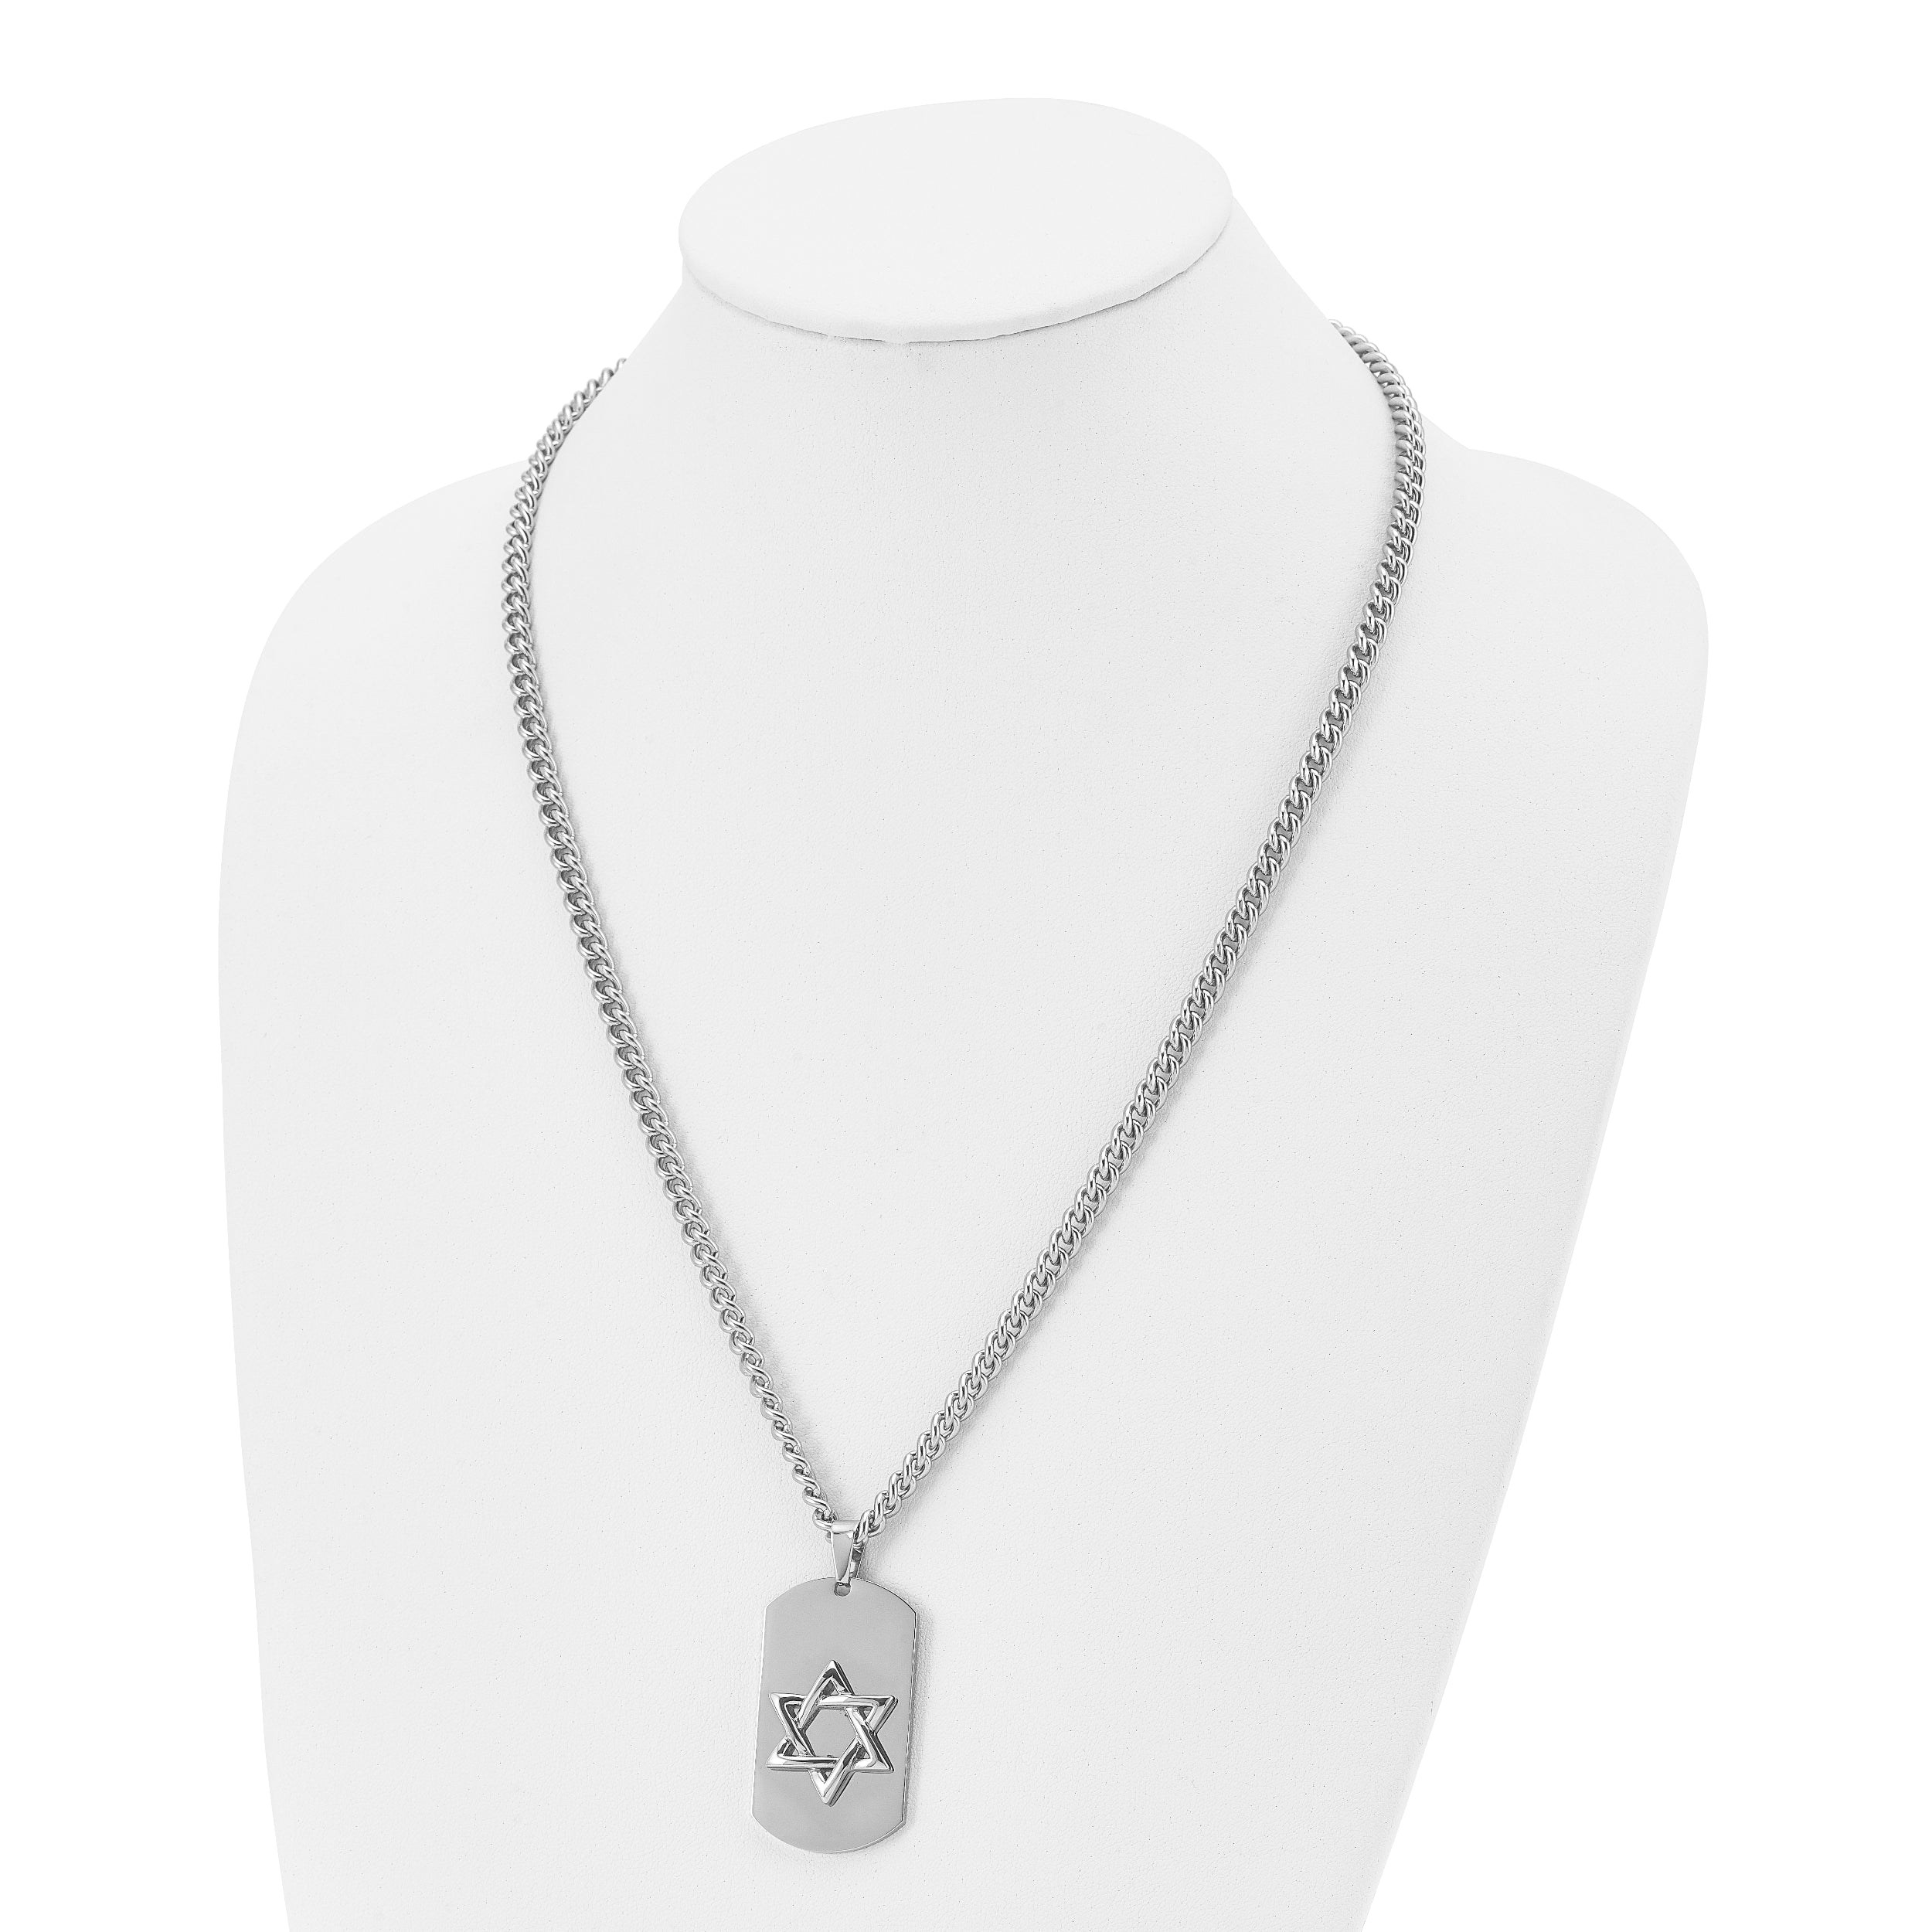 Chisel Stainless Steel Polished Star of David Dog Tag on a 24 inch Curb Chain Necklace